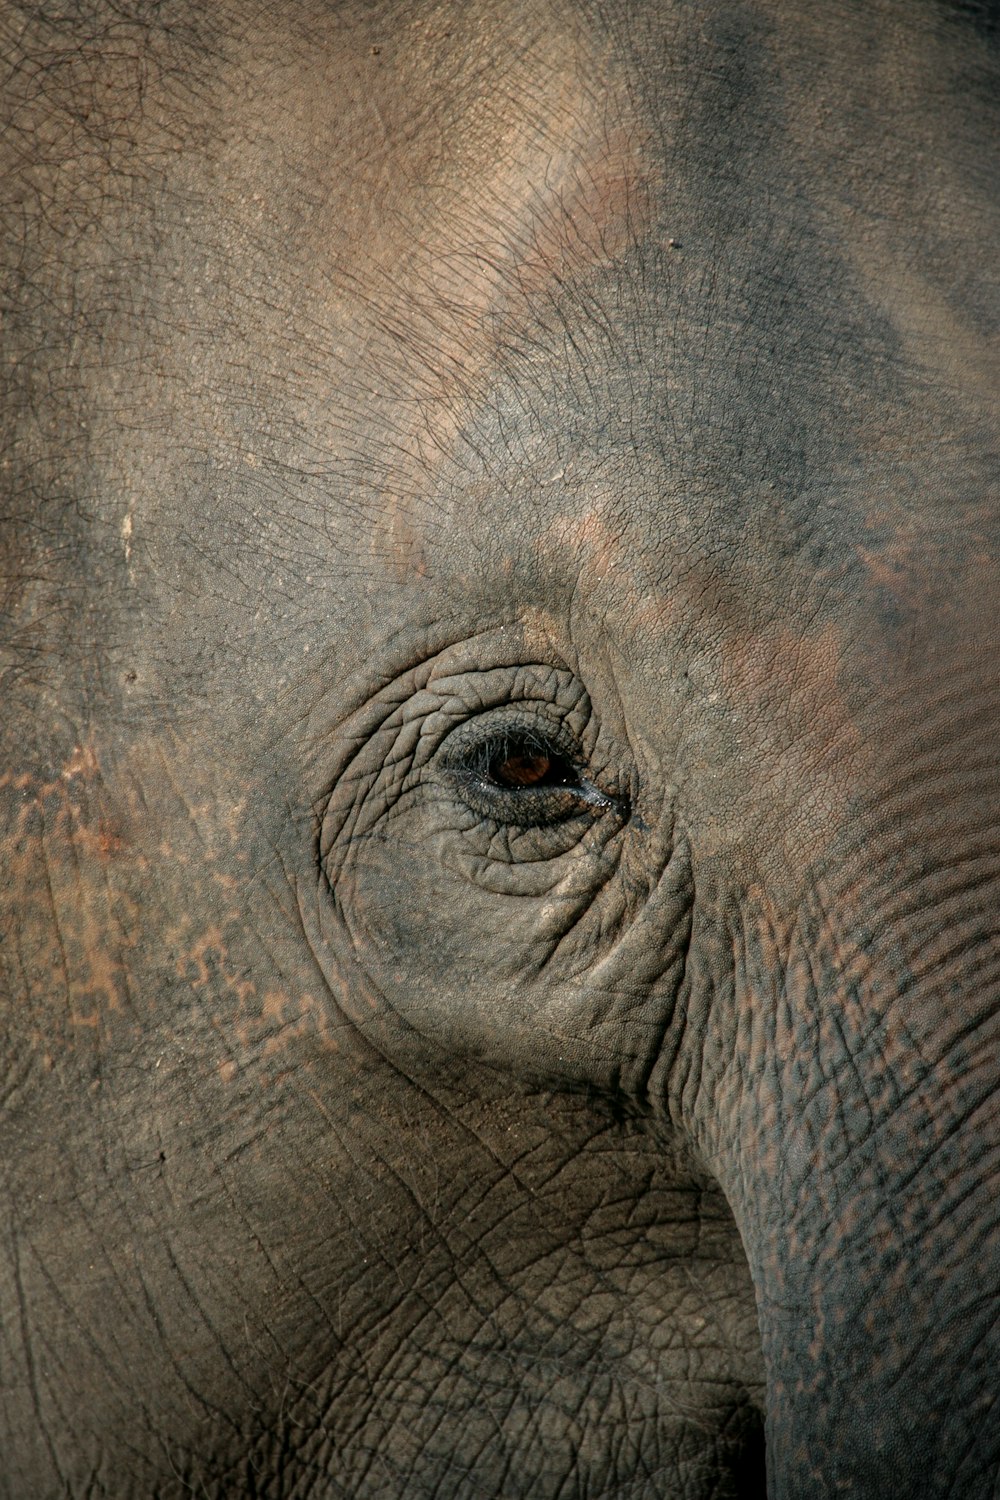 a close up of an elephant's eye and trunk